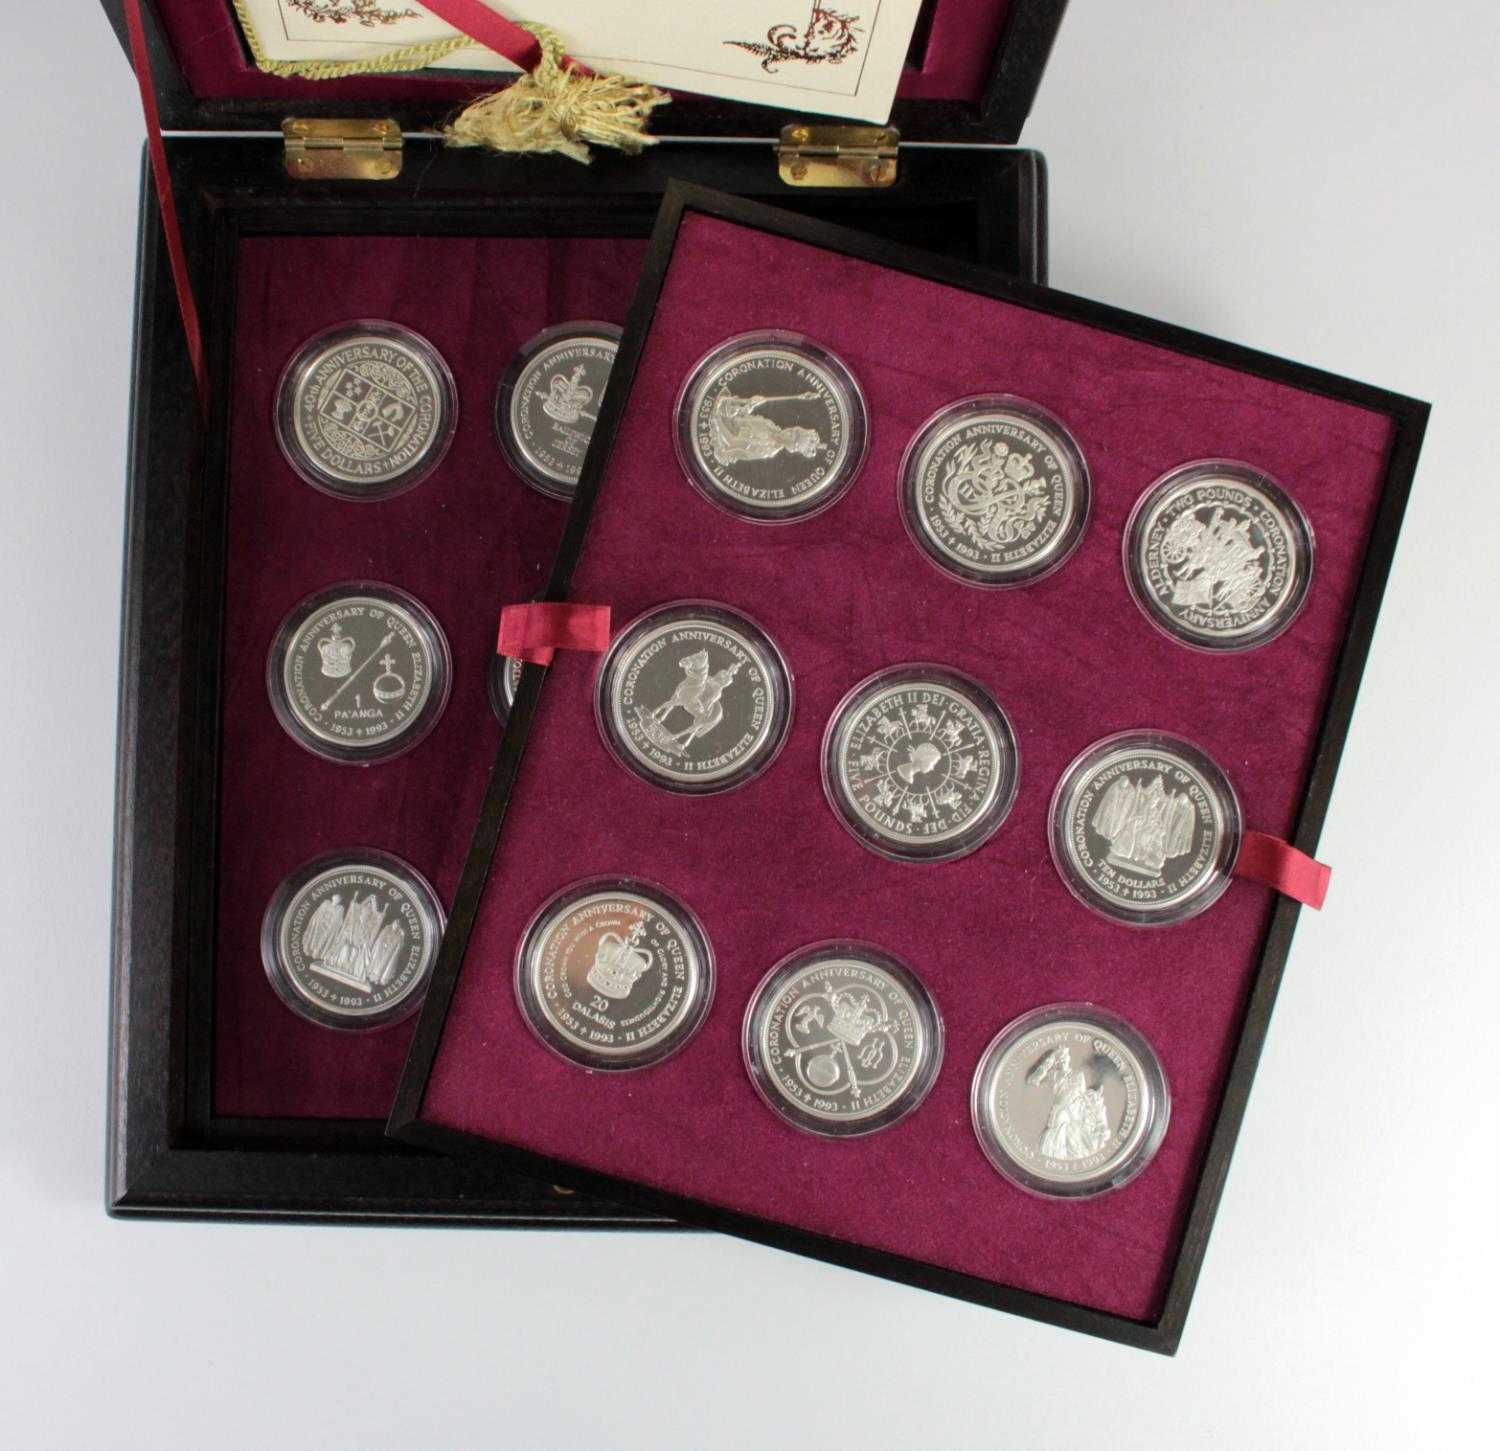 Queen Elizabeth II 40th Anniversary Coronation Crown Collection 1993. The 18 coin set all Crown-